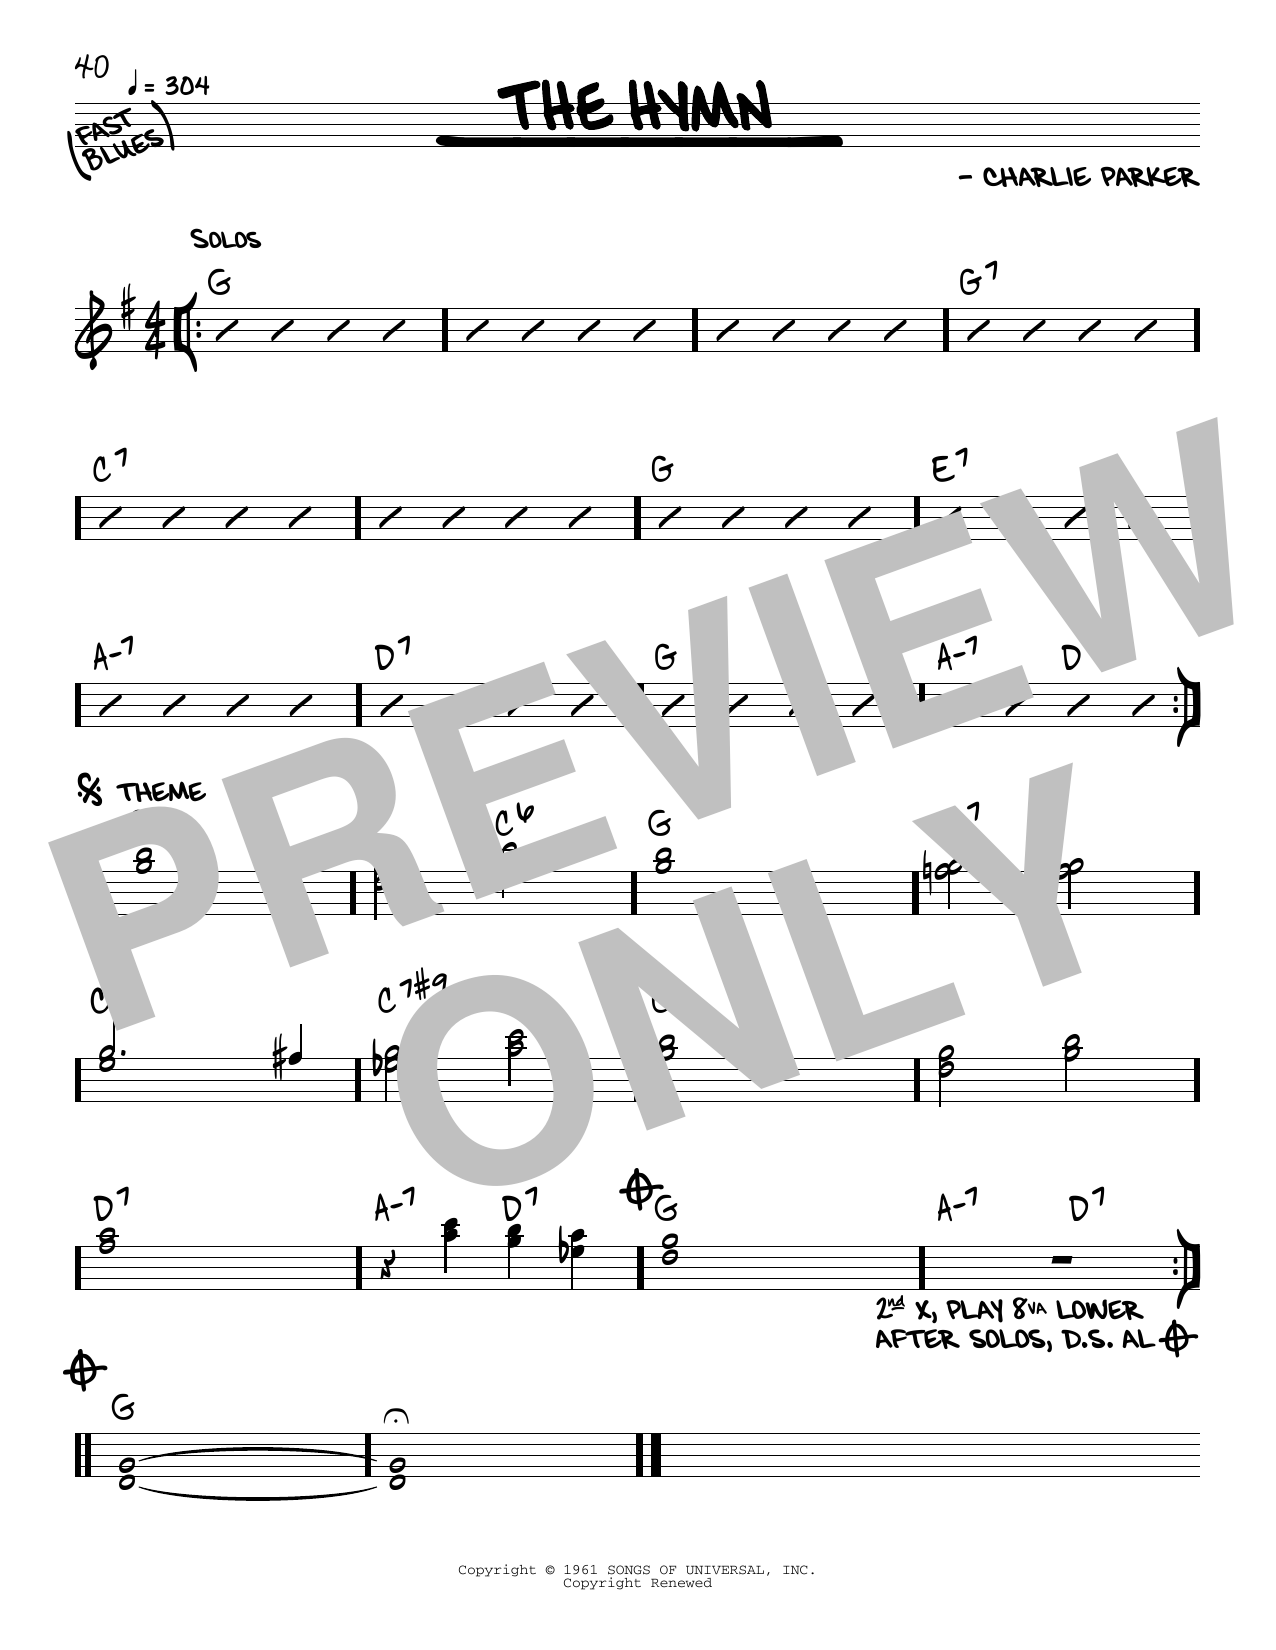 Download Charlie Parker The Hymn Sheet Music